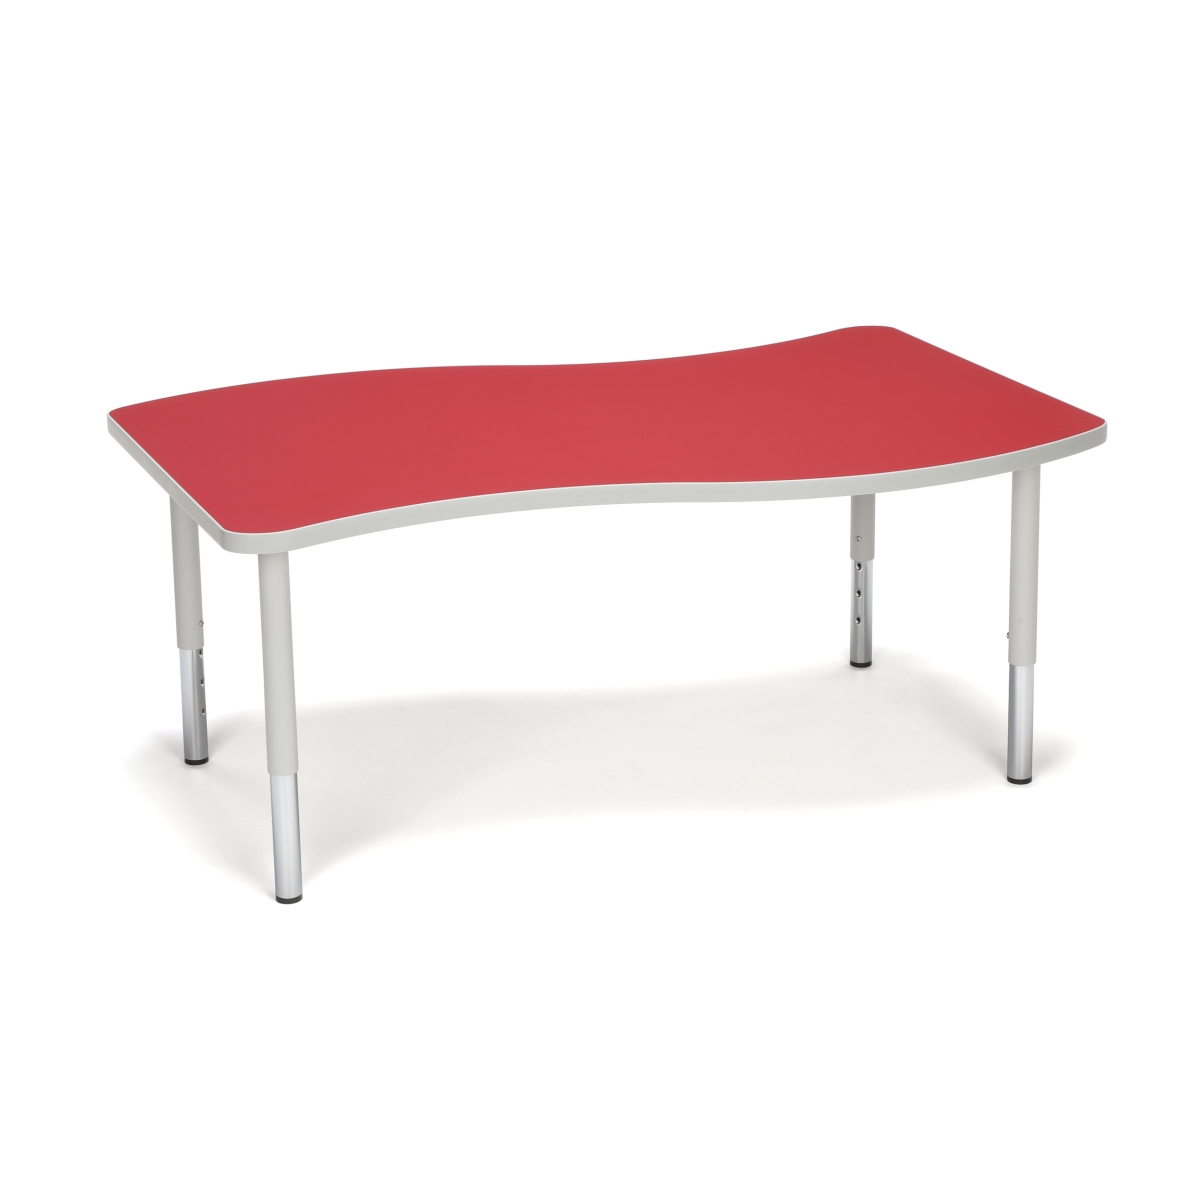 Wave-l-sl-red Adapt Series Large Wave Student Table - 18-26 In. Height Adjustable Desk, Red